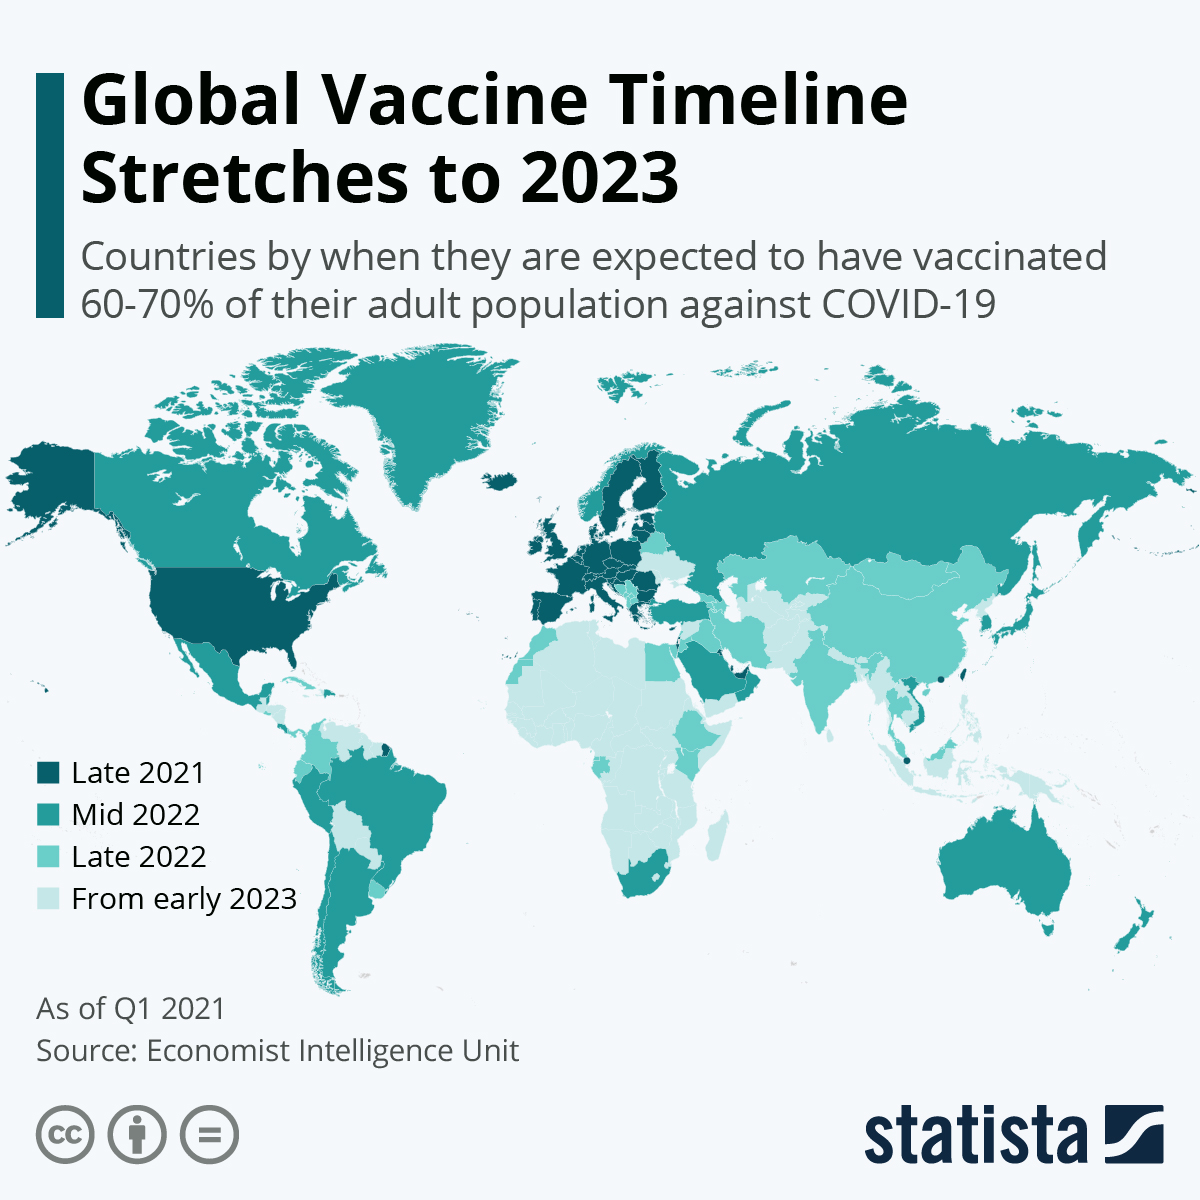 Global Vaccine Timeline Stretches to 2023